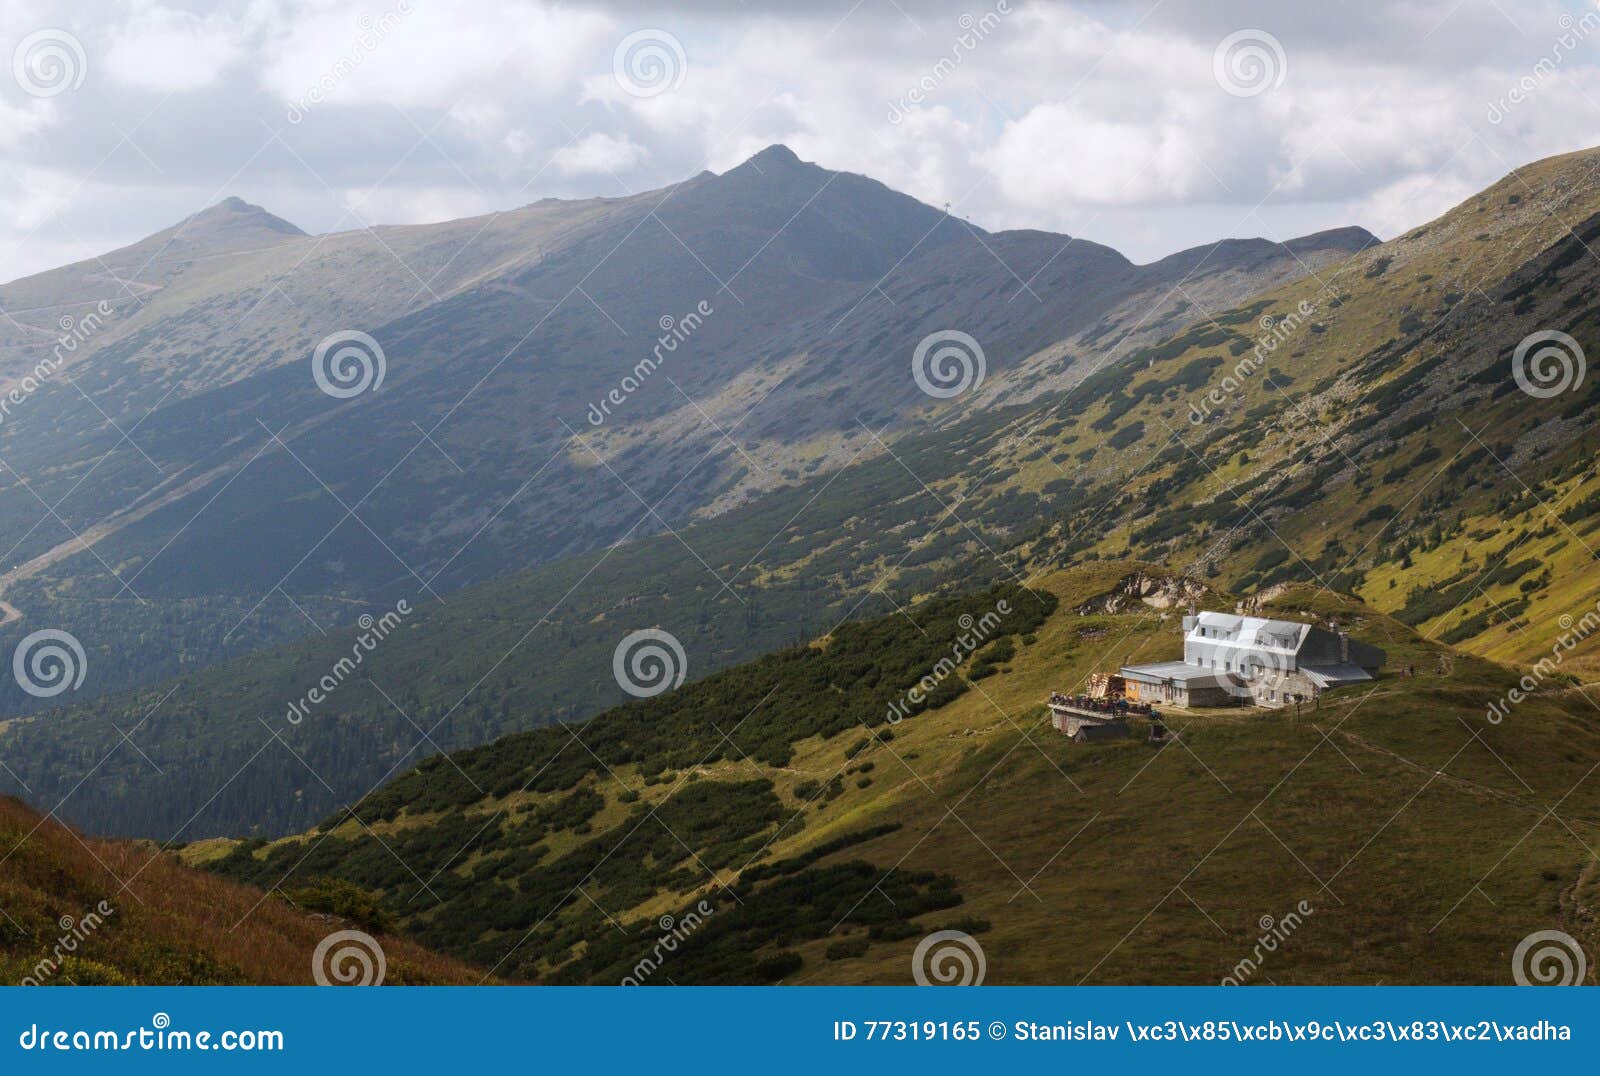 west panorama view from hillside of kralicka with chata gen. m. r. stefanika in nizke tatry mountains